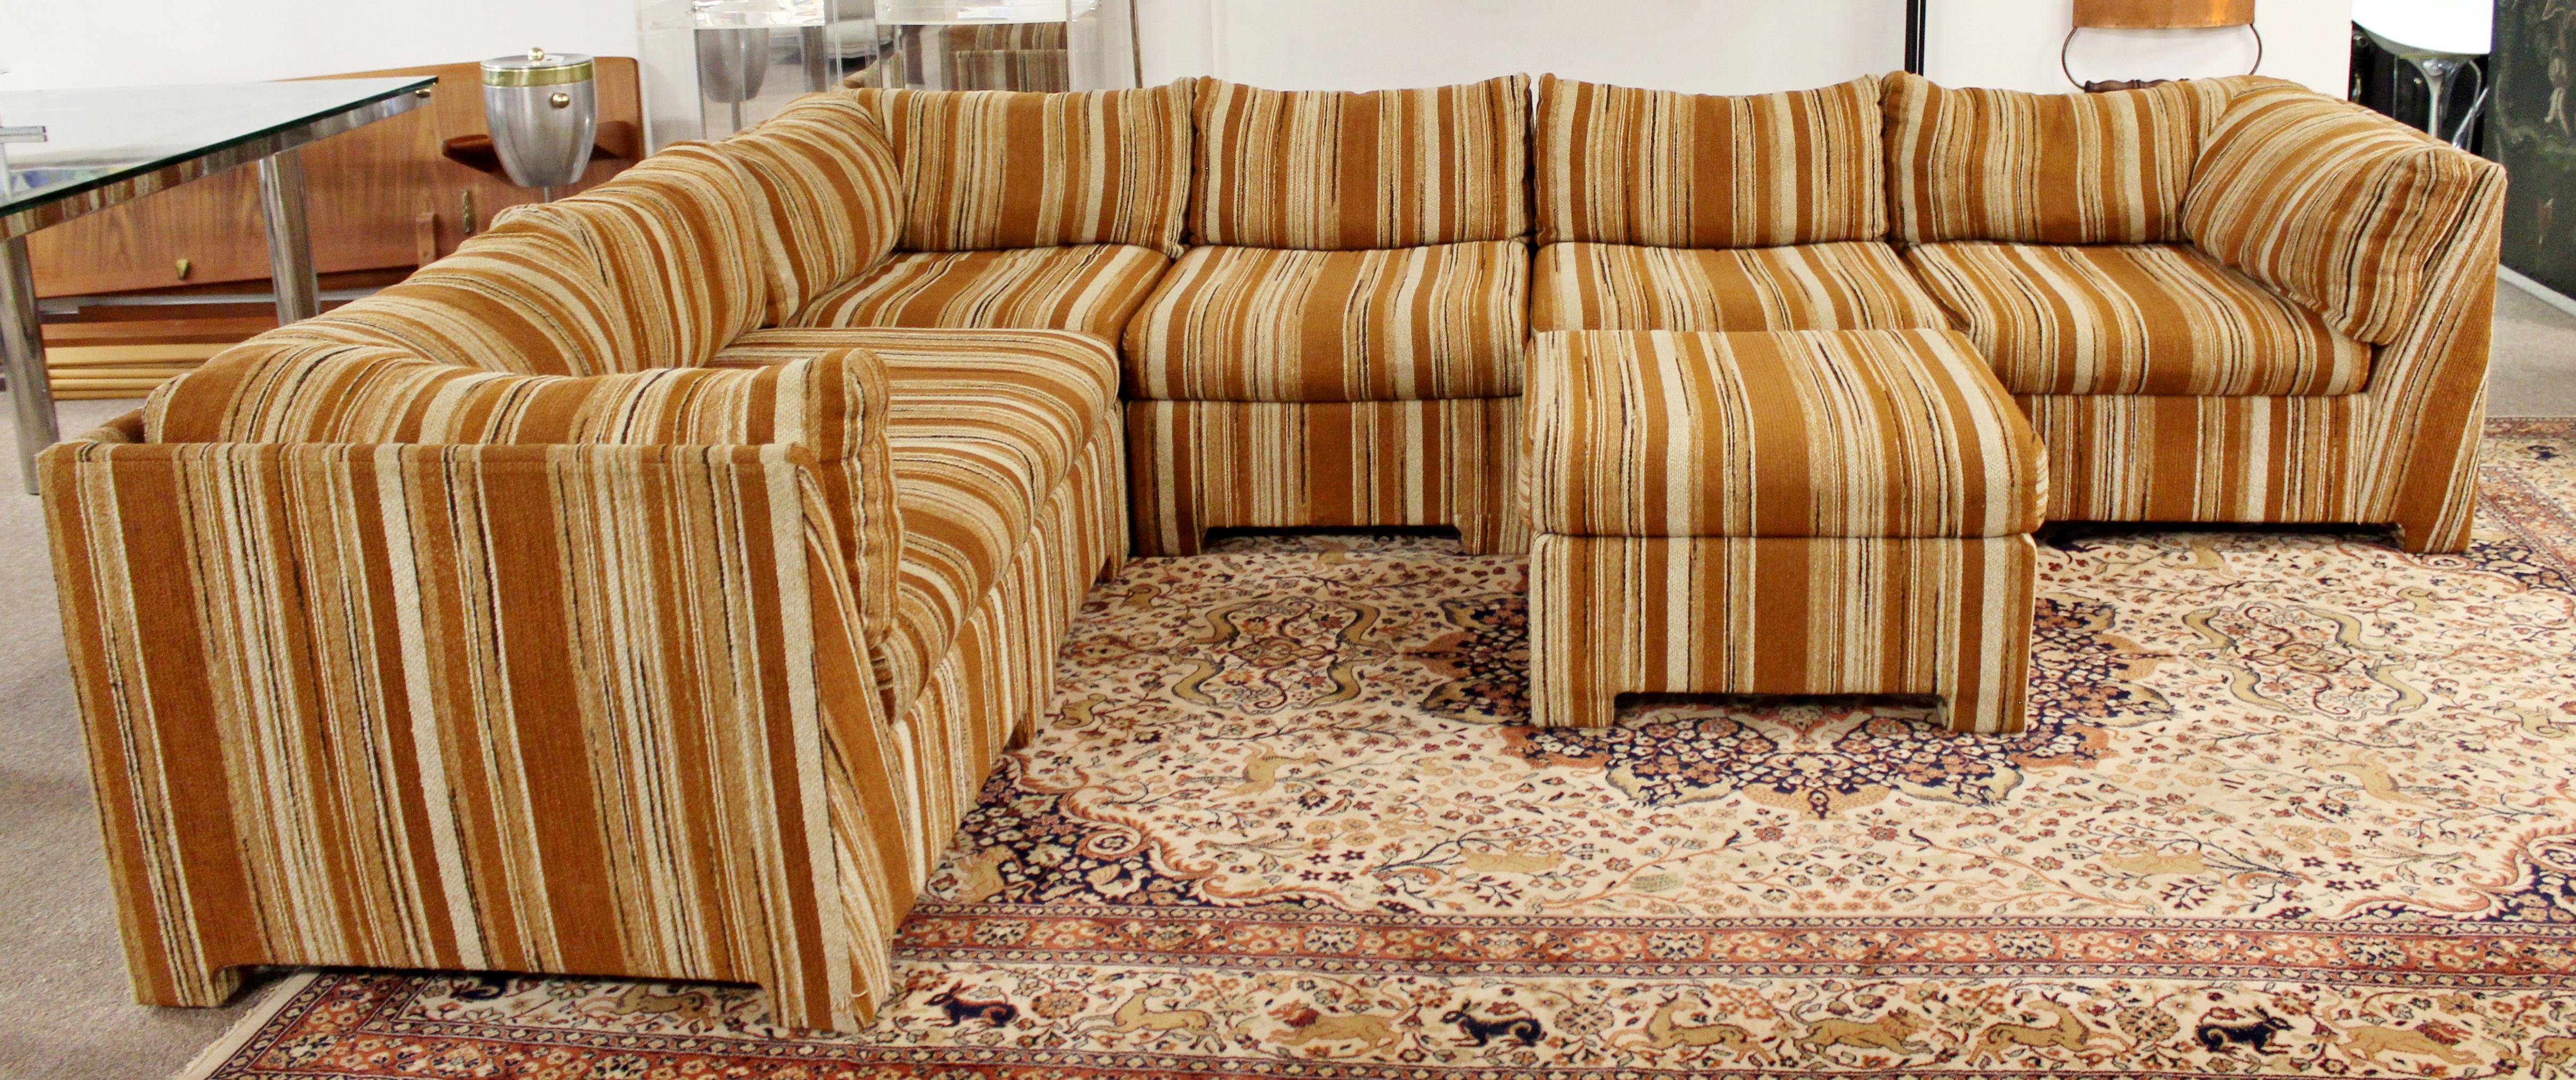 For your consideration is a phenomenal, six piece sofa sectional, with ottoman, by Selig of Monroe, made in Denmark, circa 1970s. In very good vintage condition. The dimensions of the corner pieces are 32